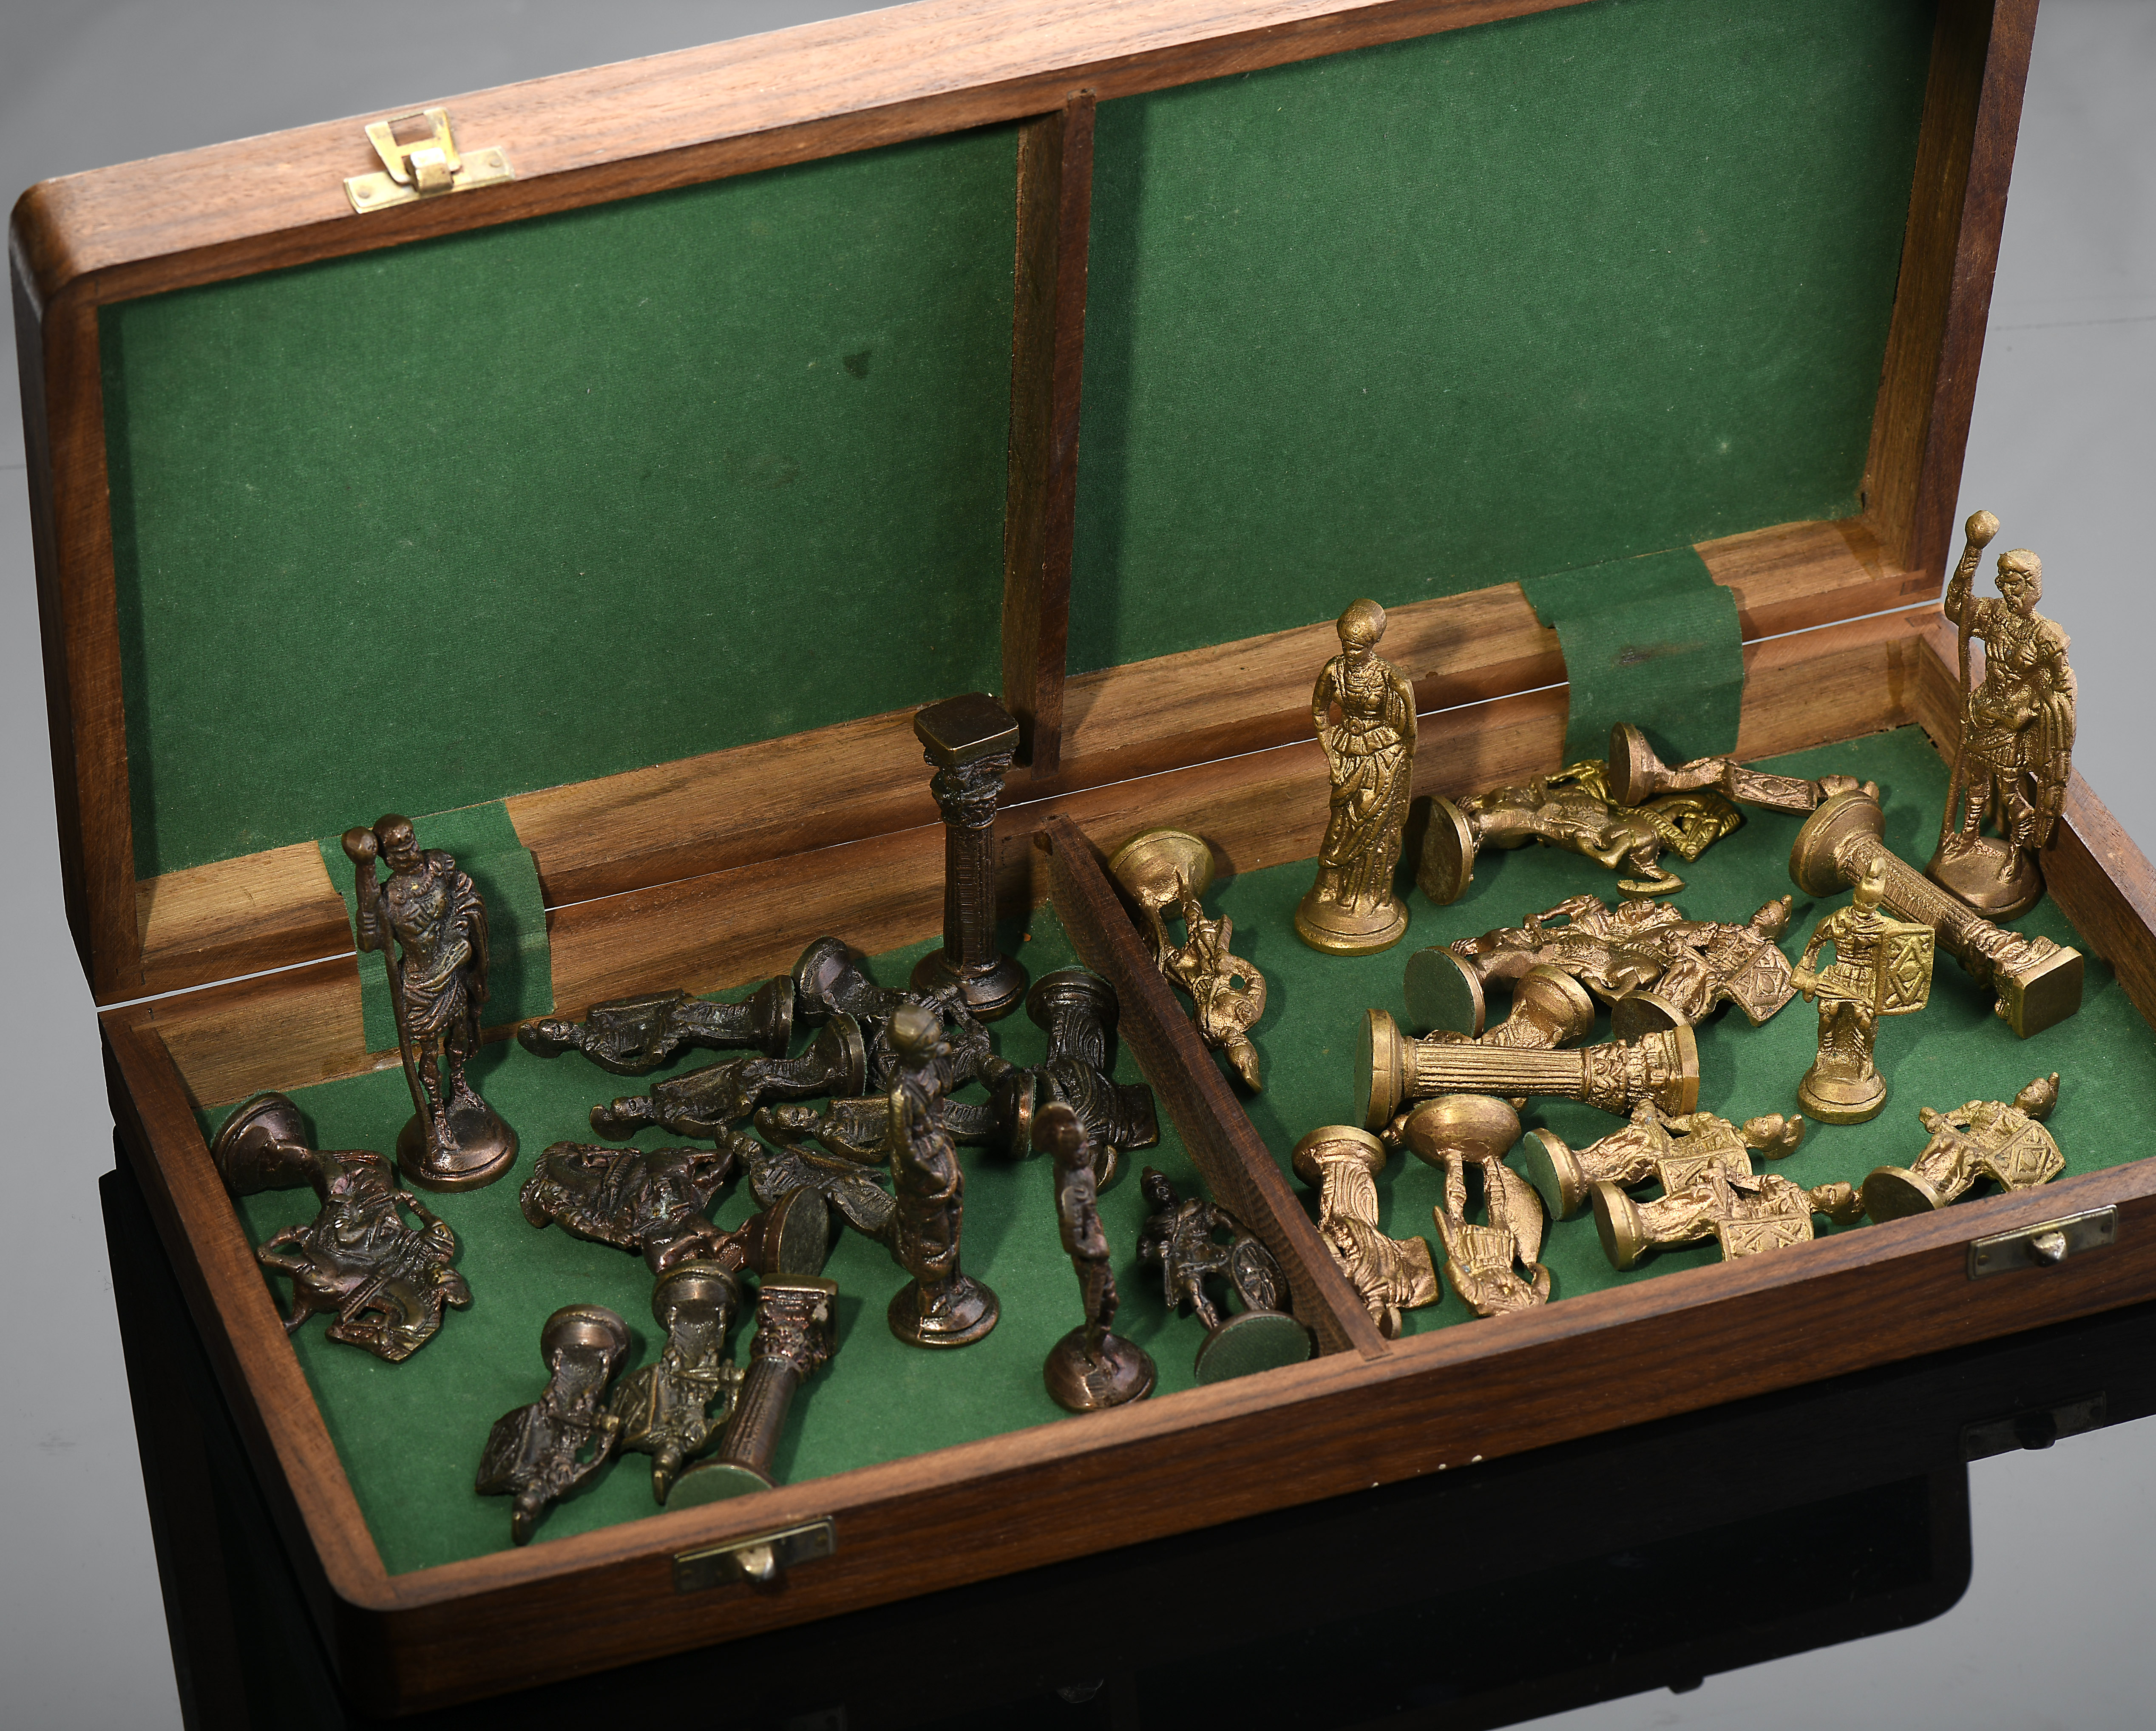 Chess pieces "Roman Armies" and chessboard closing in a box shape - Image 4 of 4